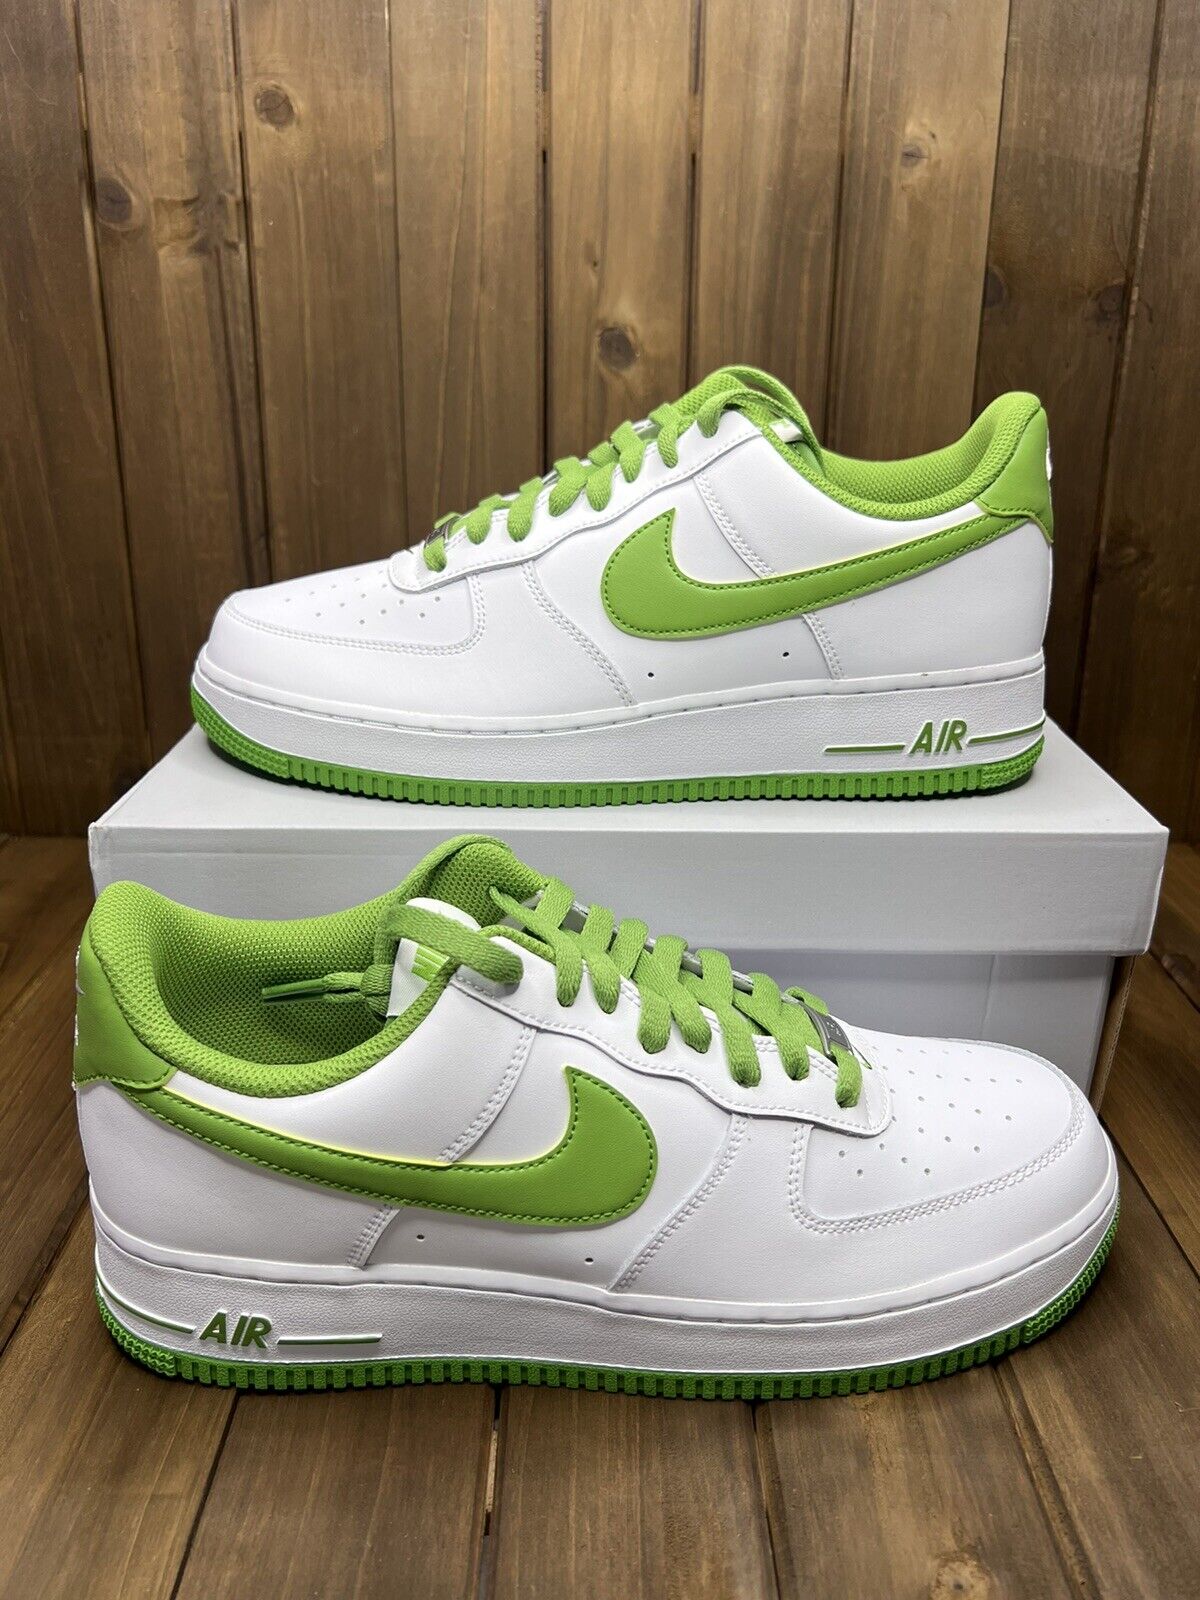 Nike Air Force 1 Low 07 White Chlorophyll Green Mens Size 13 DH7561 105